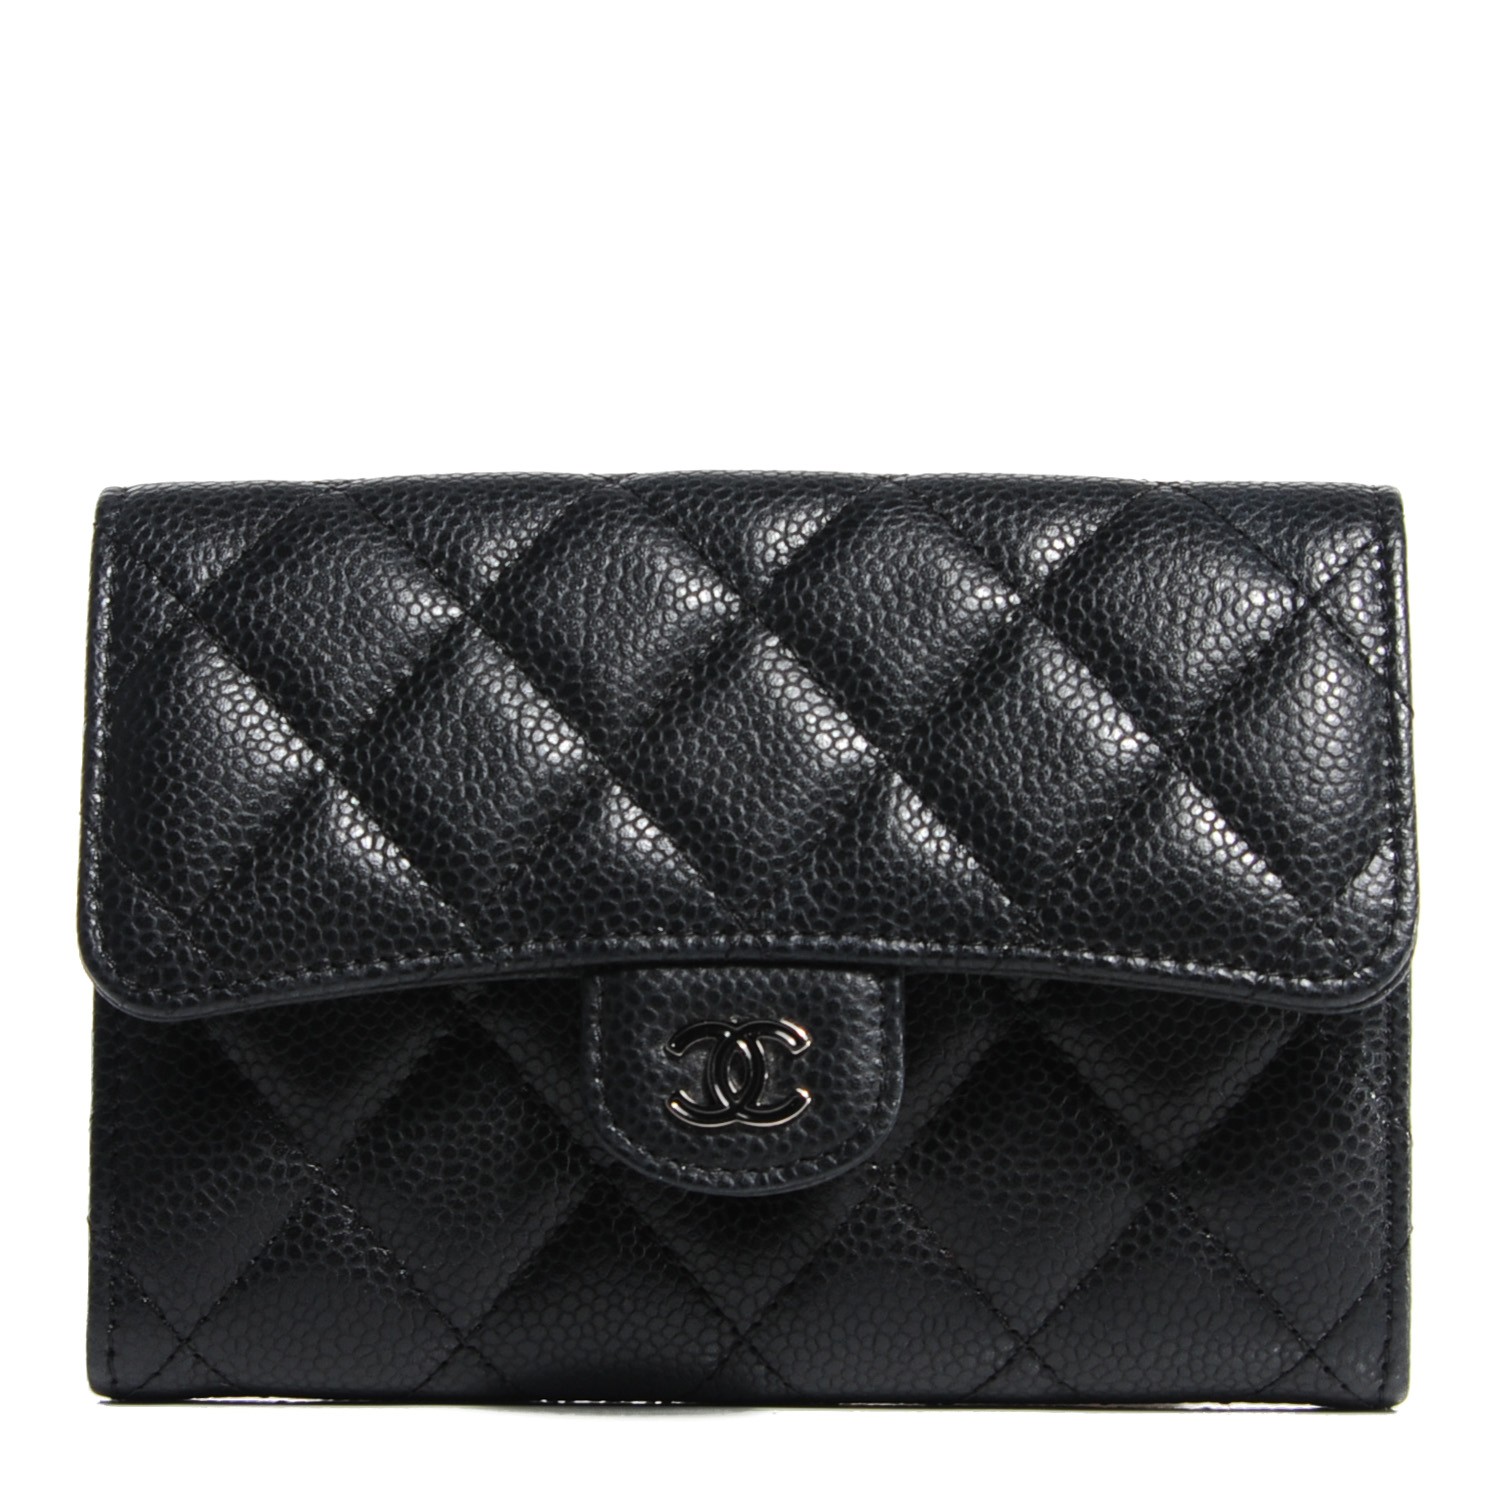 CHANEL Caviar Quilted Small Flap Wallet Black 126927